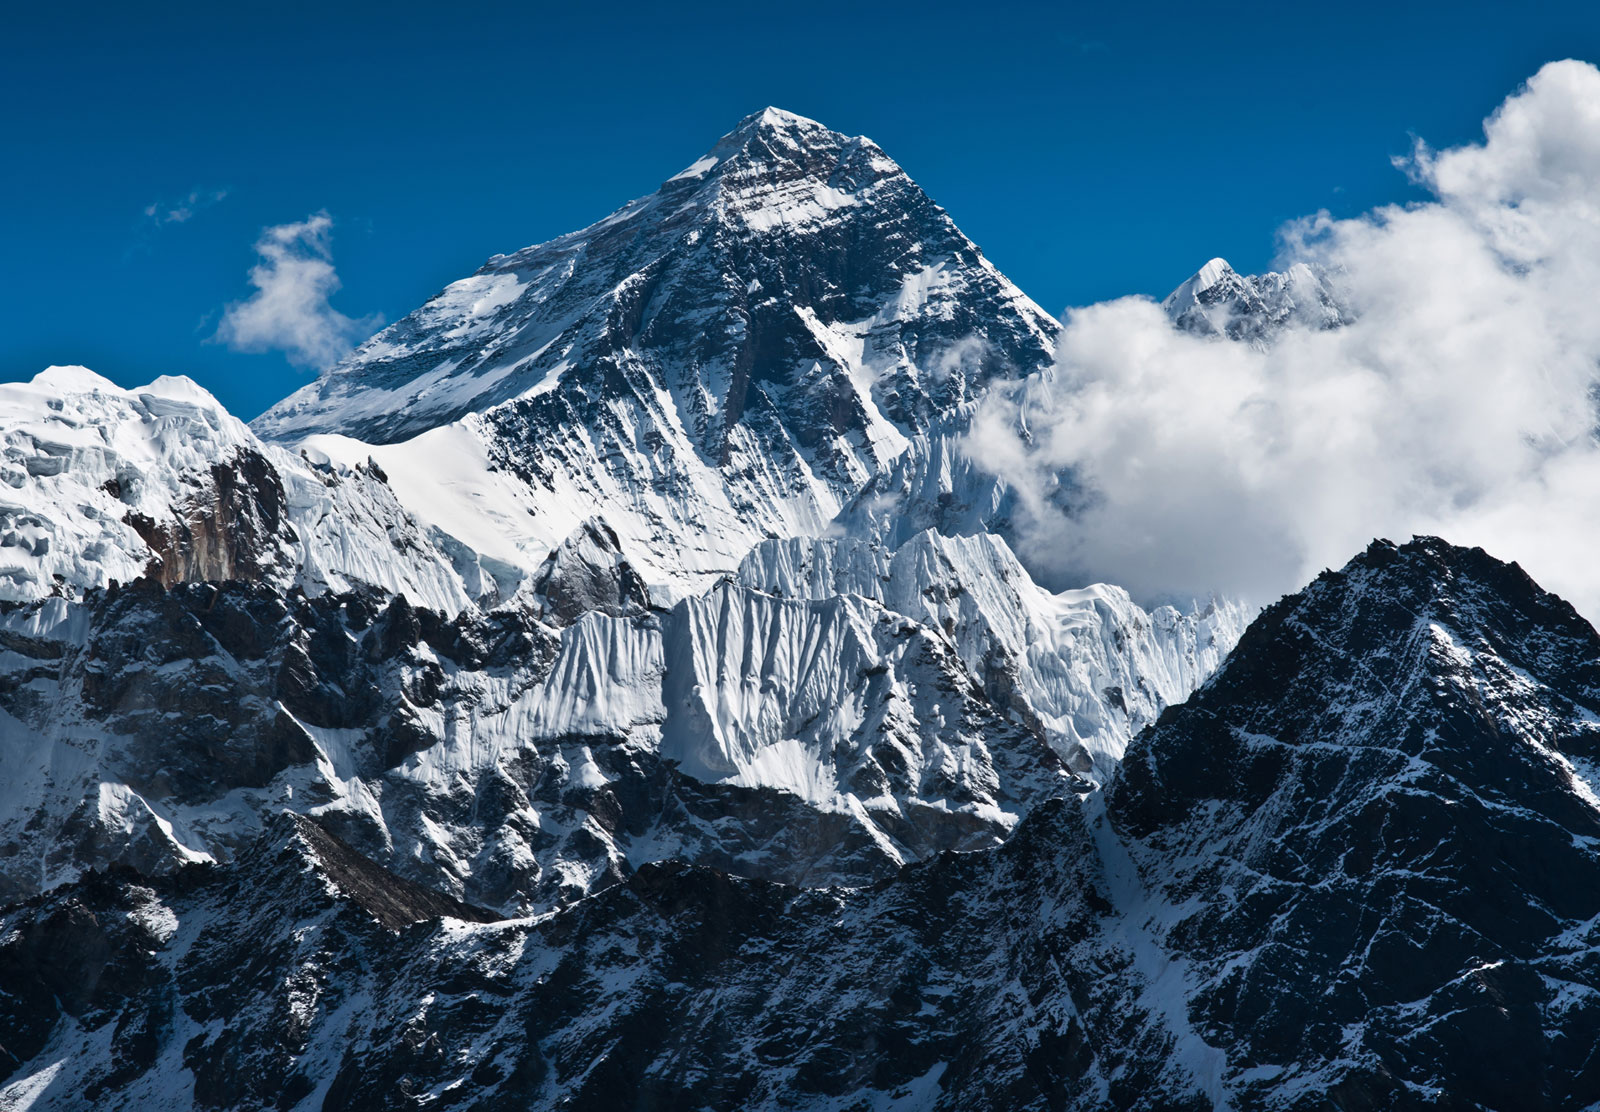 Nepal government extends Nepal Mountaineering Association’s management rights for 27 mountains